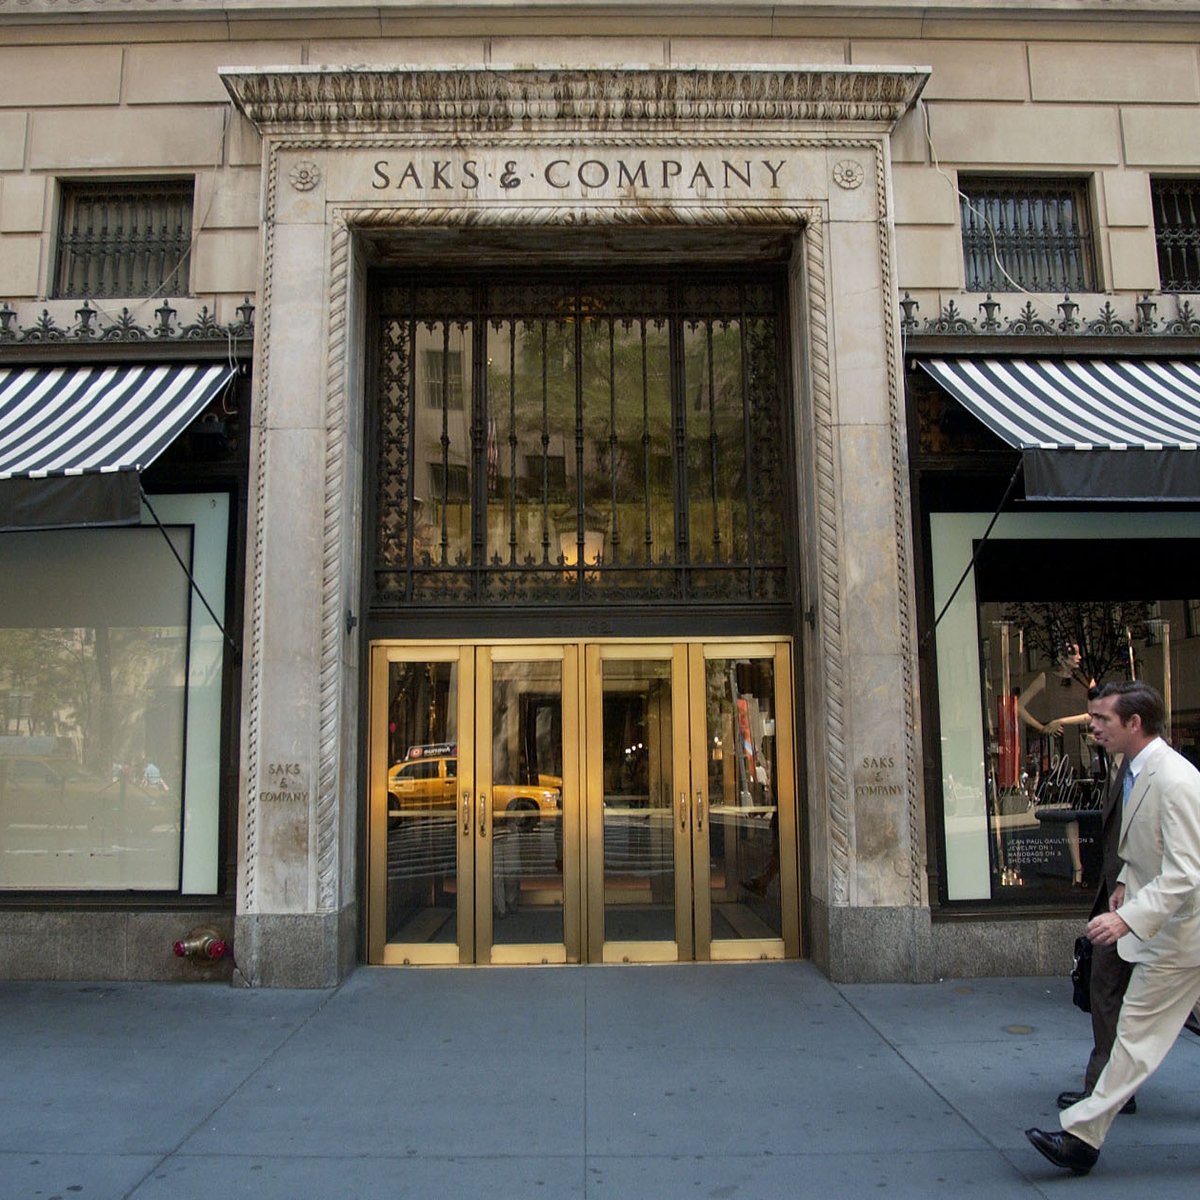 American Dream allure coaxes Saks out of Short Hills - New York